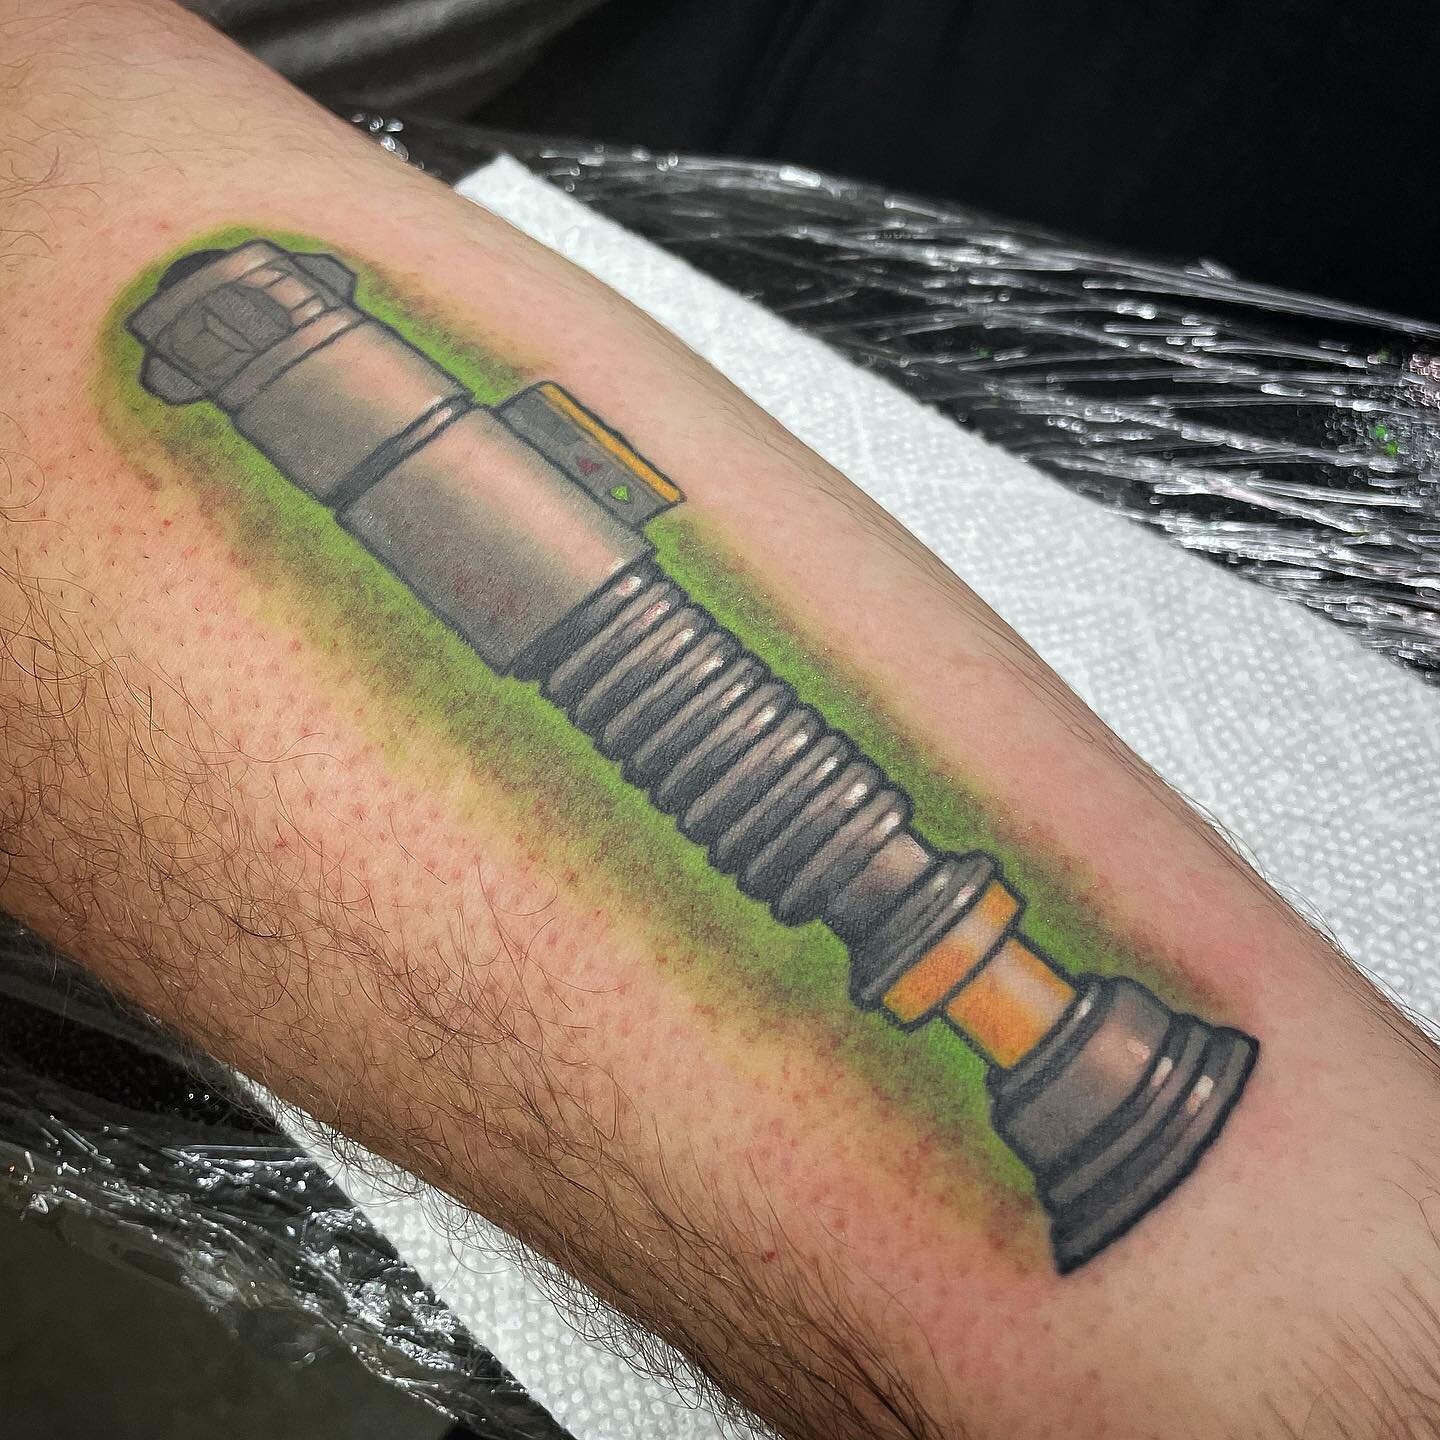 Star Wars lightsaber done by @codysmithtattoos at our kennesaw location. Stop by and chat with him to make an appointment! #tattoo #tattoos #starwars #ink #lightsaber